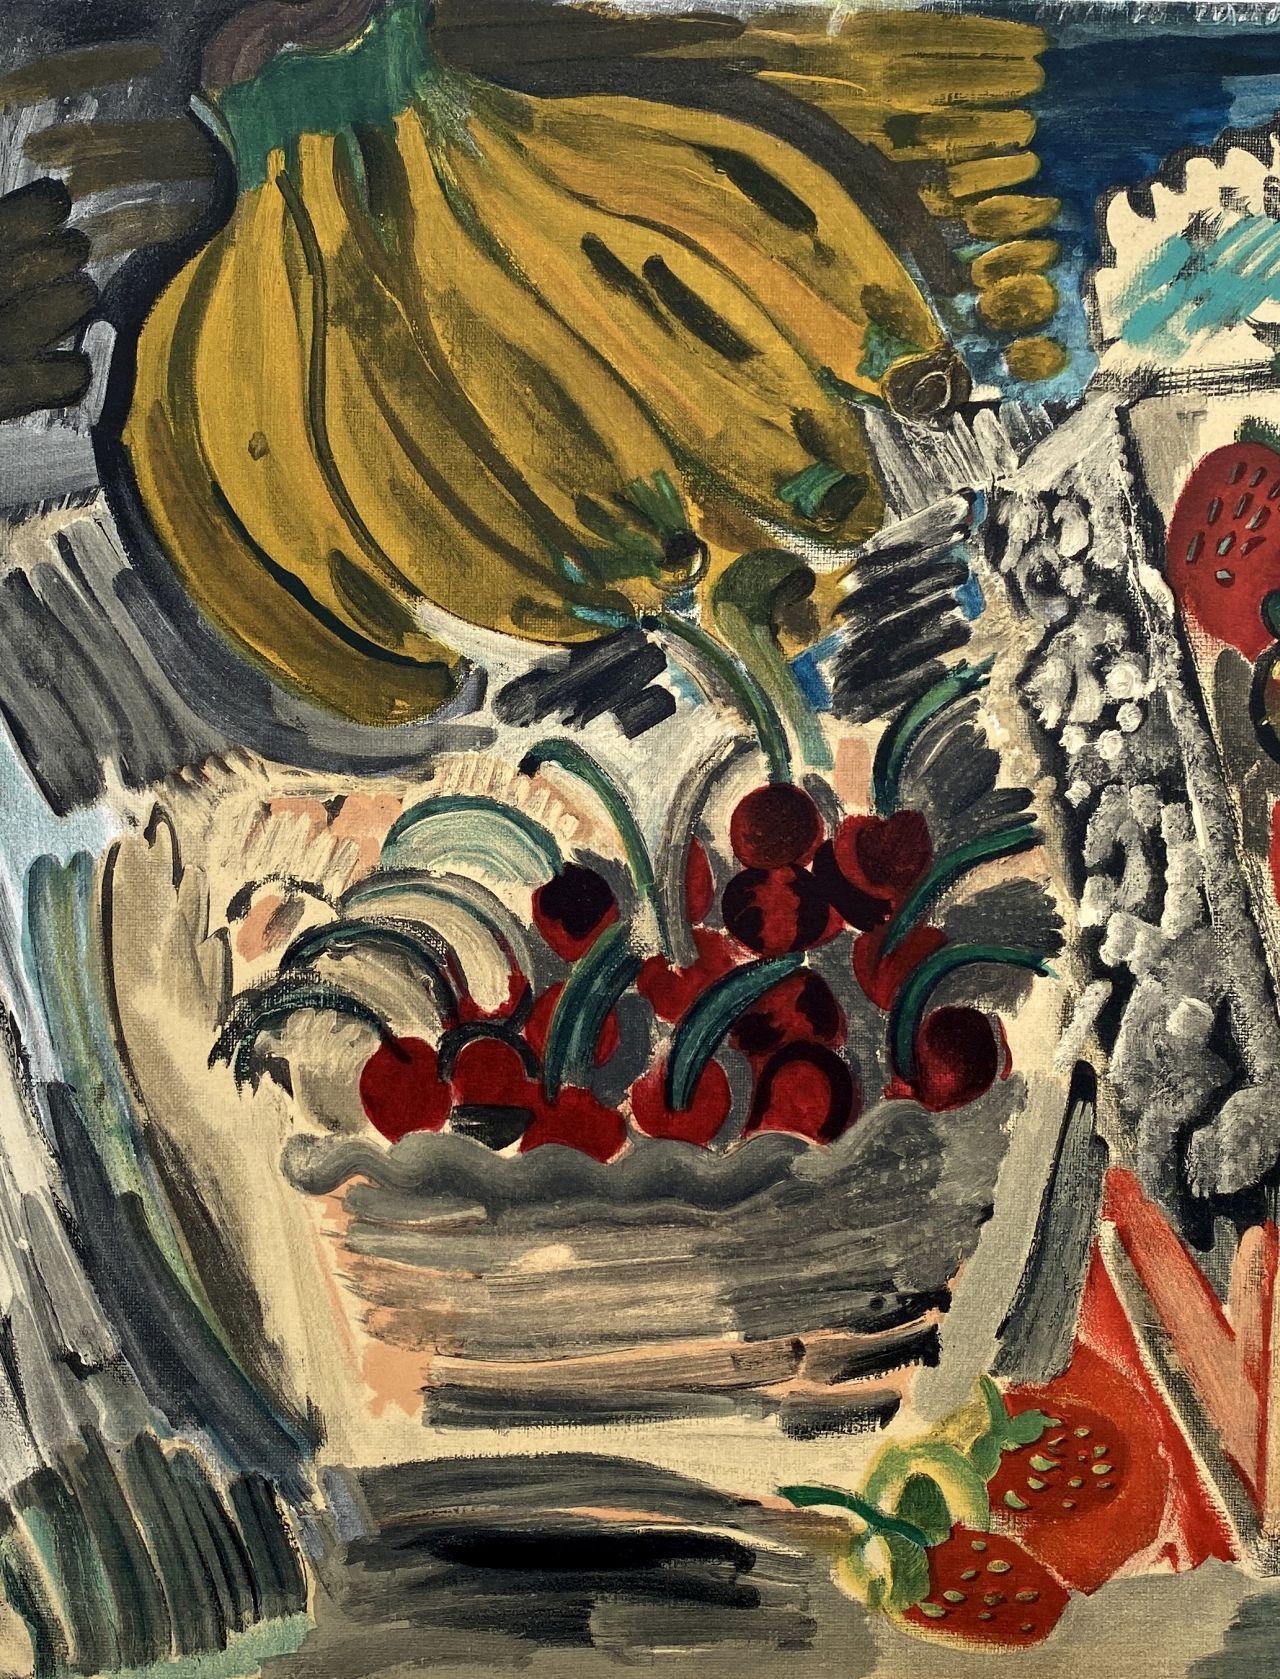 Still Life with Fruits - Lithograph Signed in the Plate (Mourlot) - Modern Print by Raoul Dufy